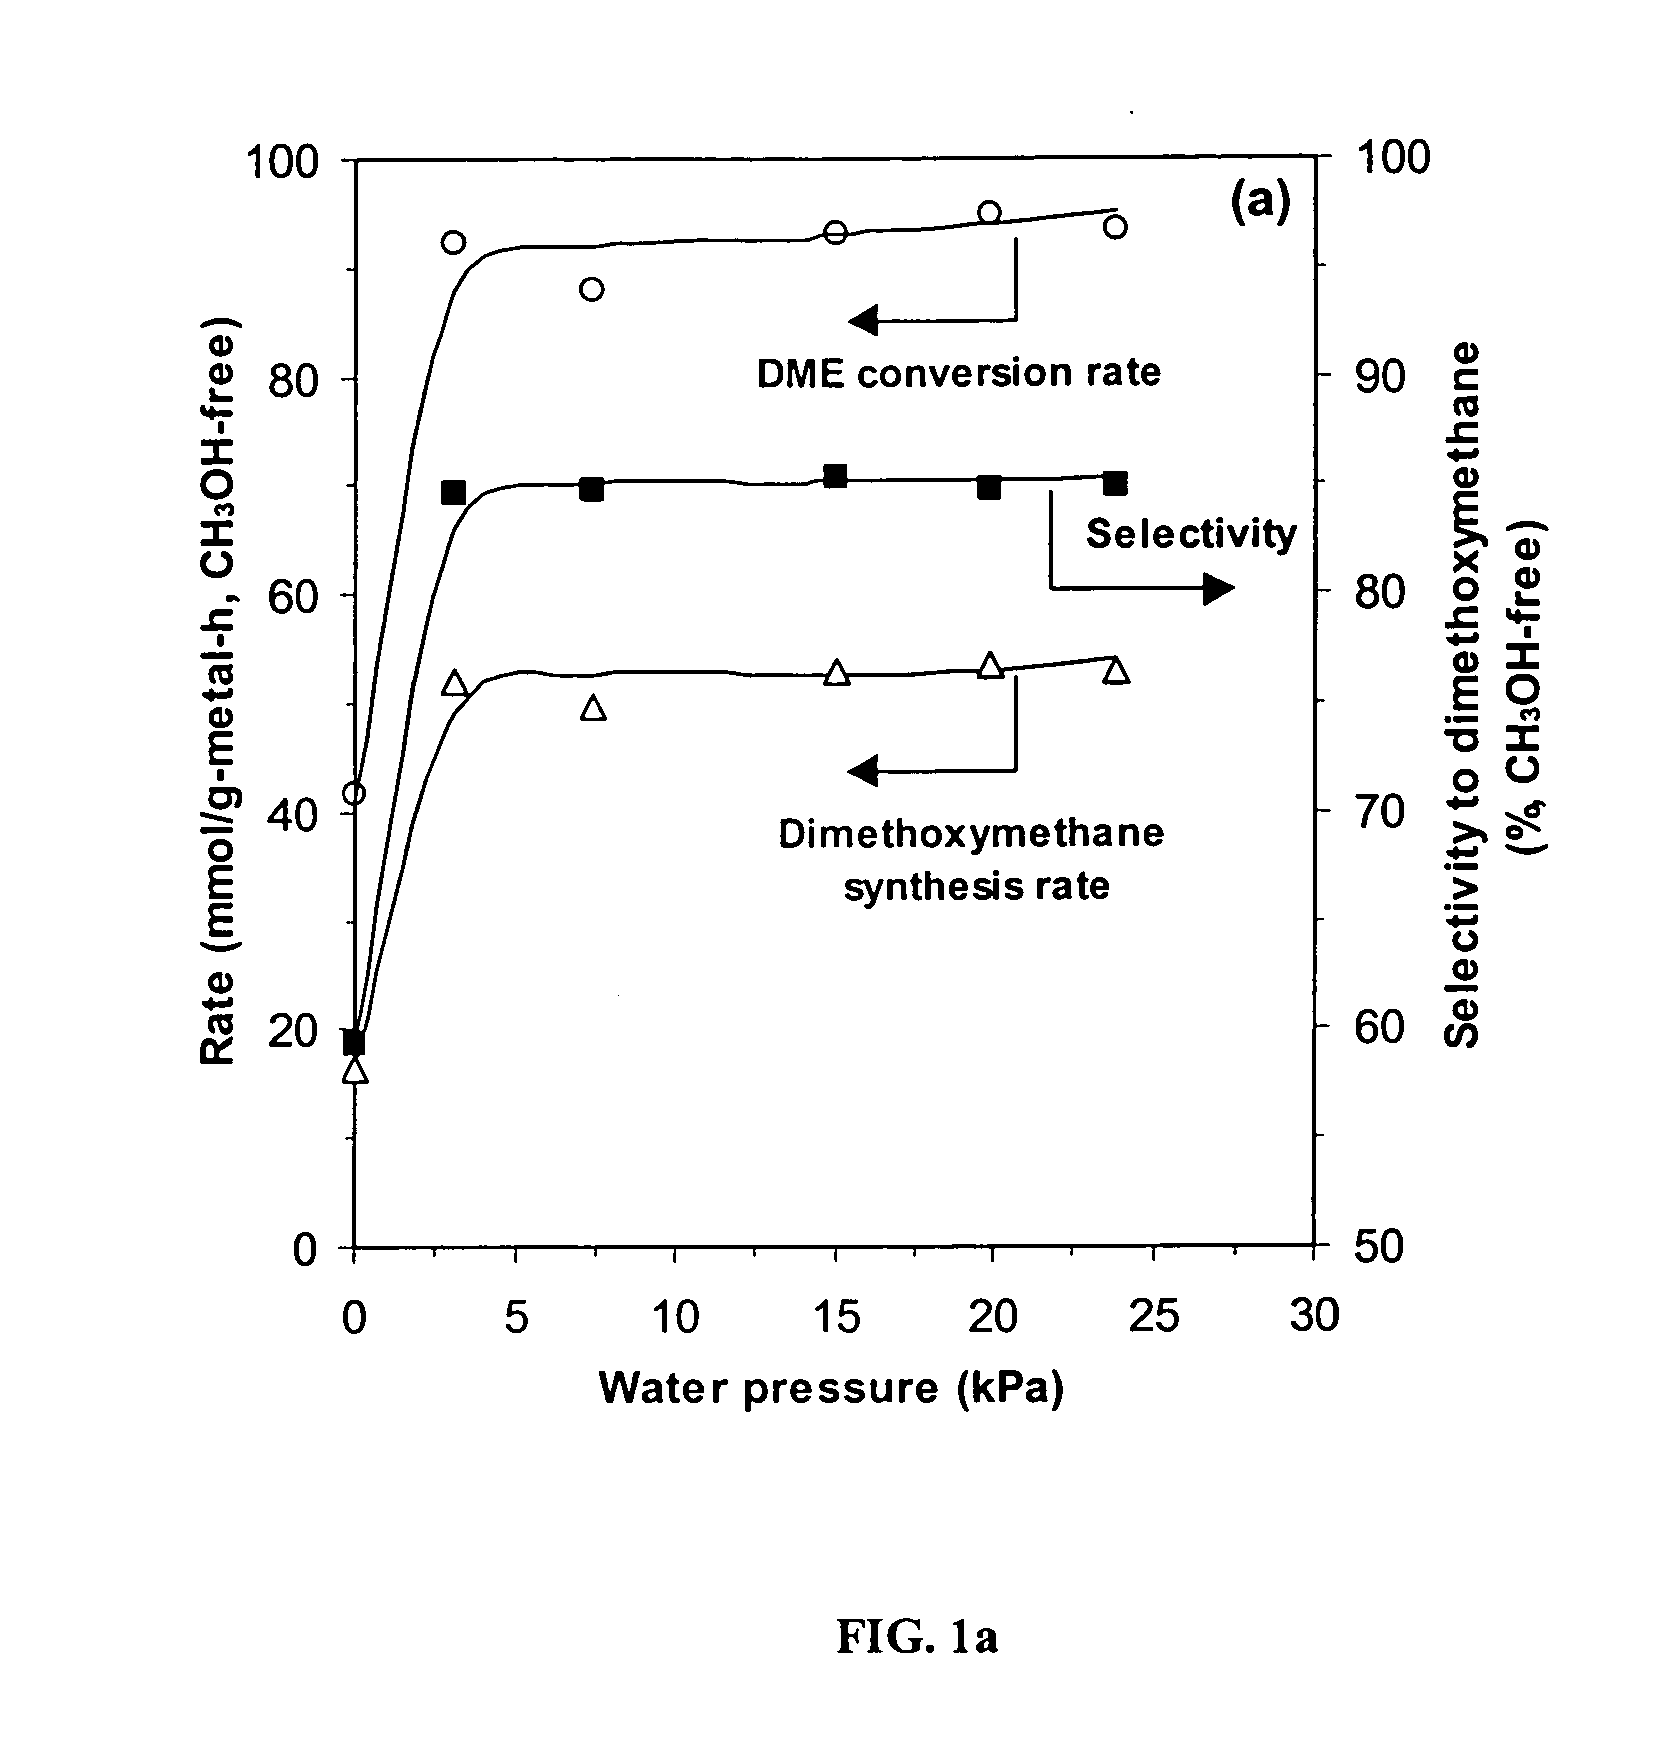 Oxidation of methanol and/or dimethyl ether using supported molybdenum-containing heteropolyacid catalysts